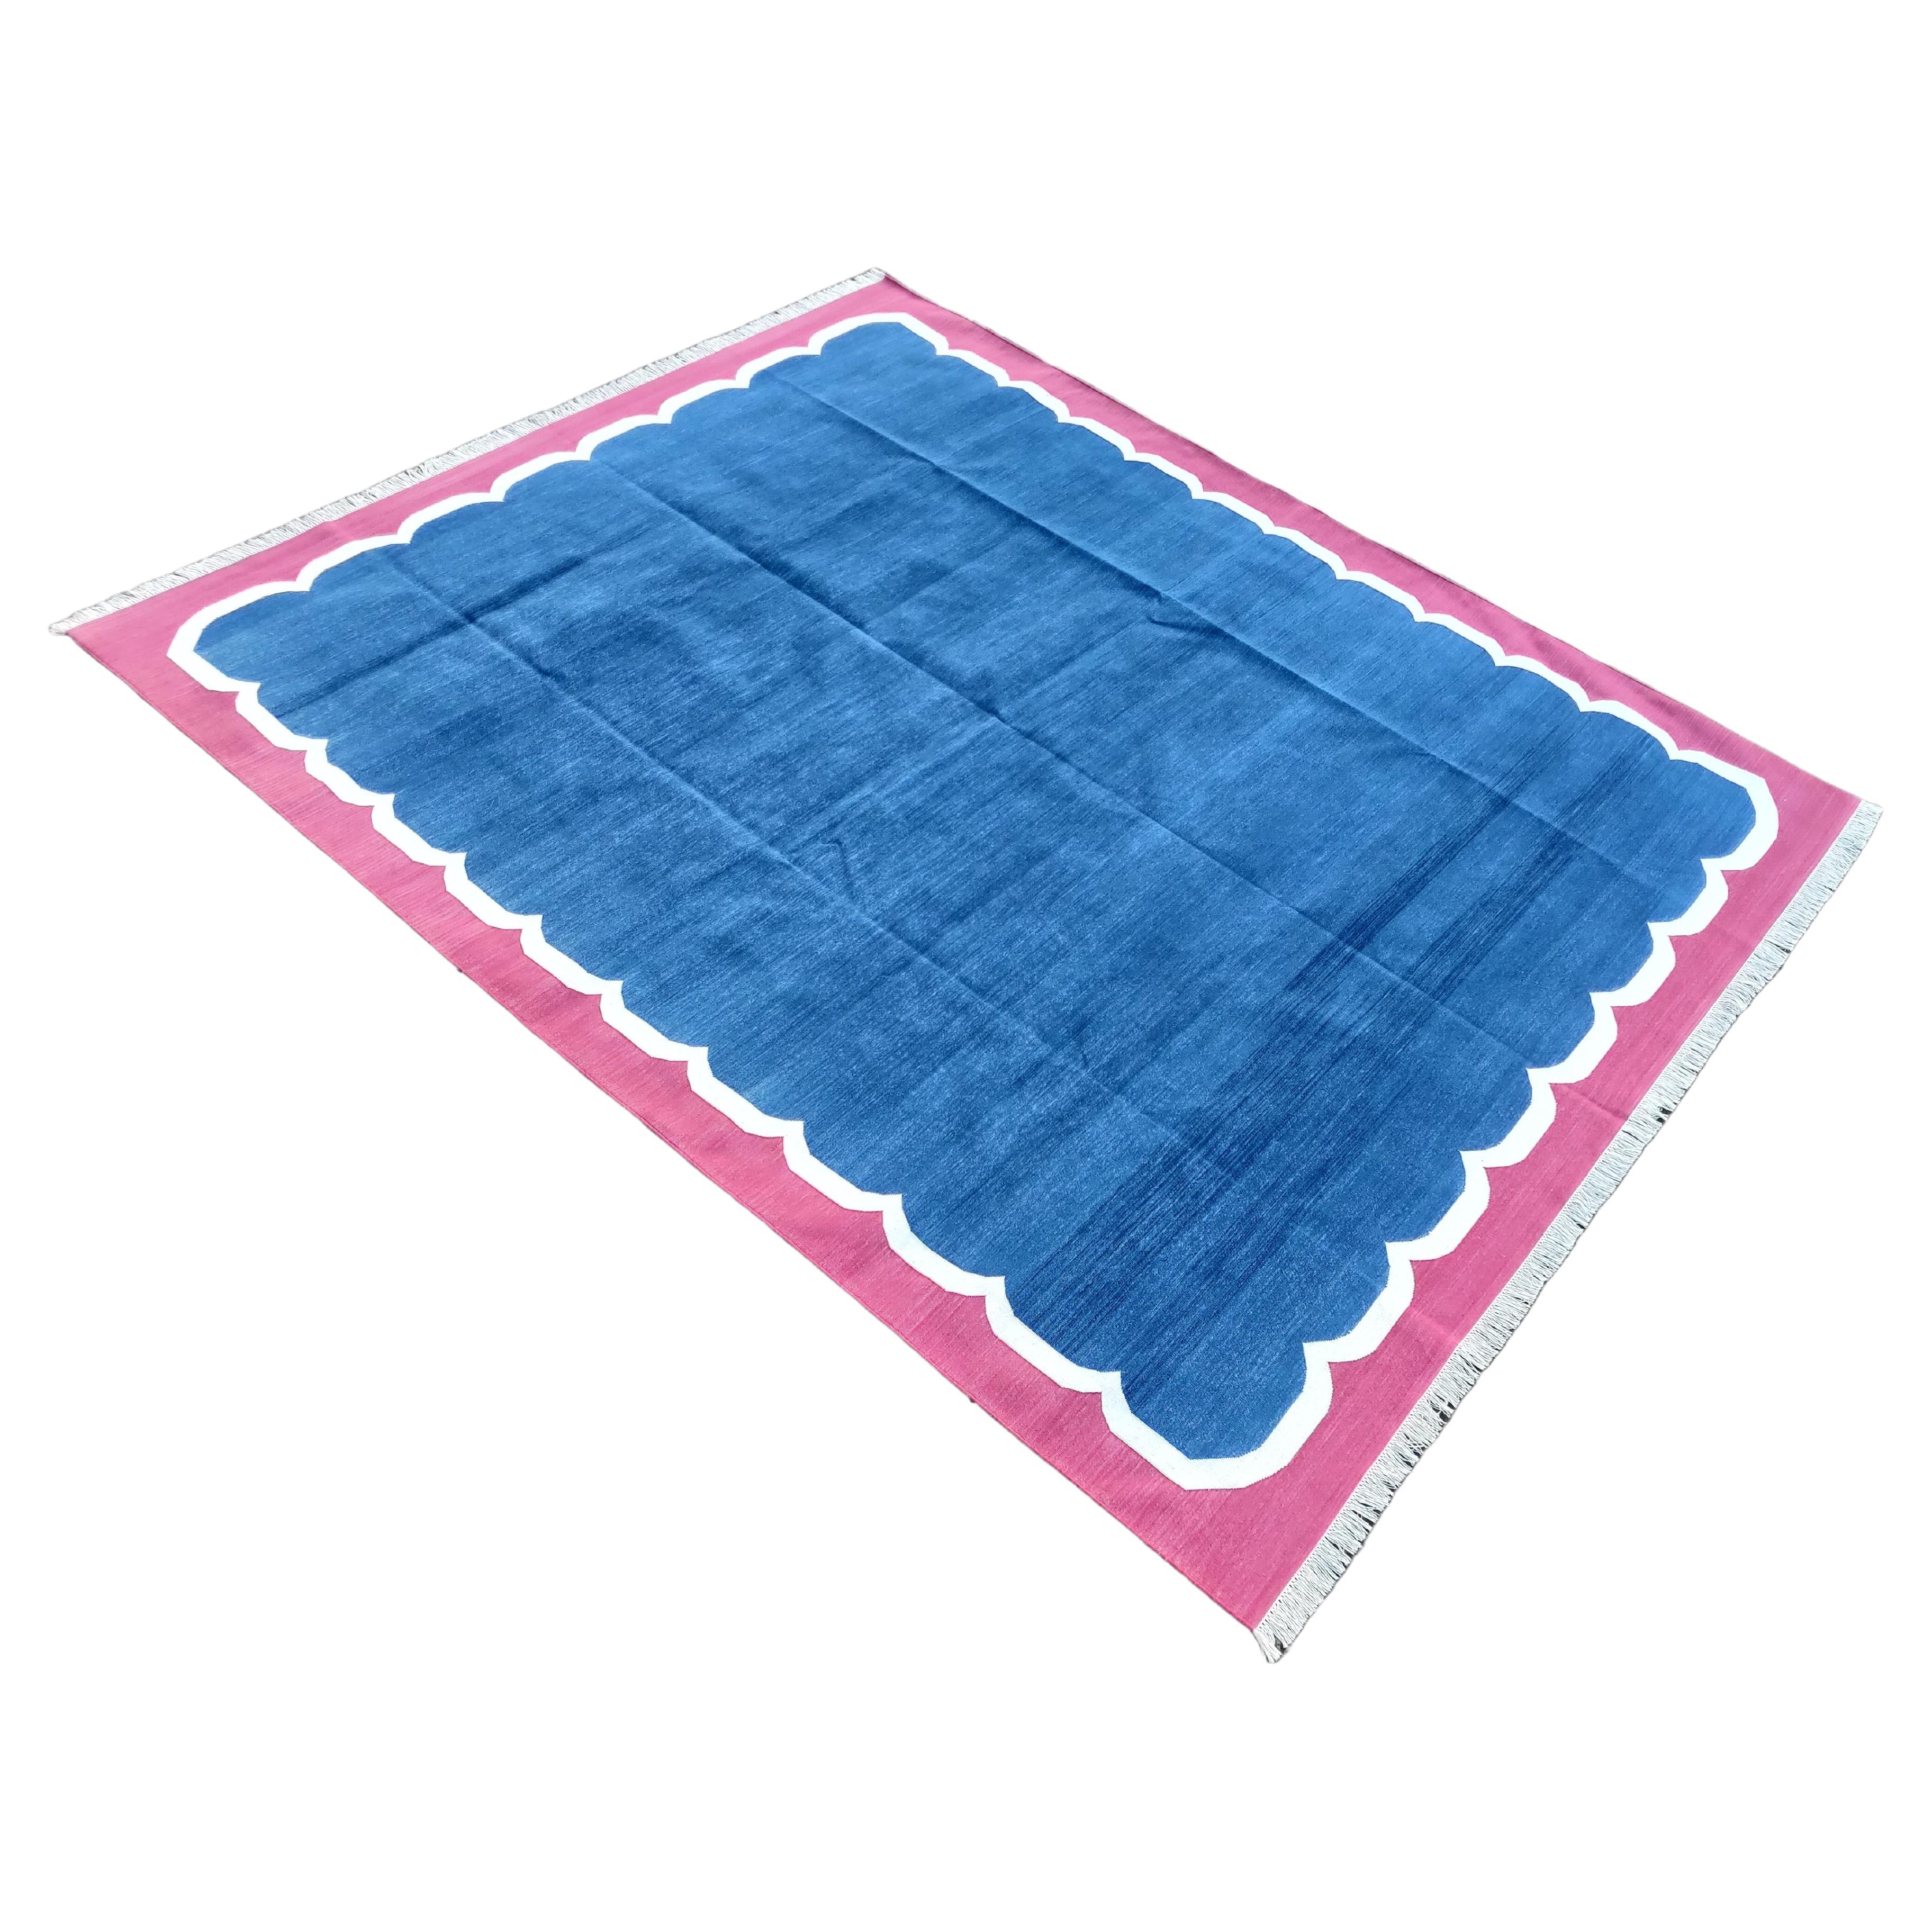 Handmade Cotton Area Flat Weave Rug, 8x10 Blue And Pink Scalloped Indian Dhurrie